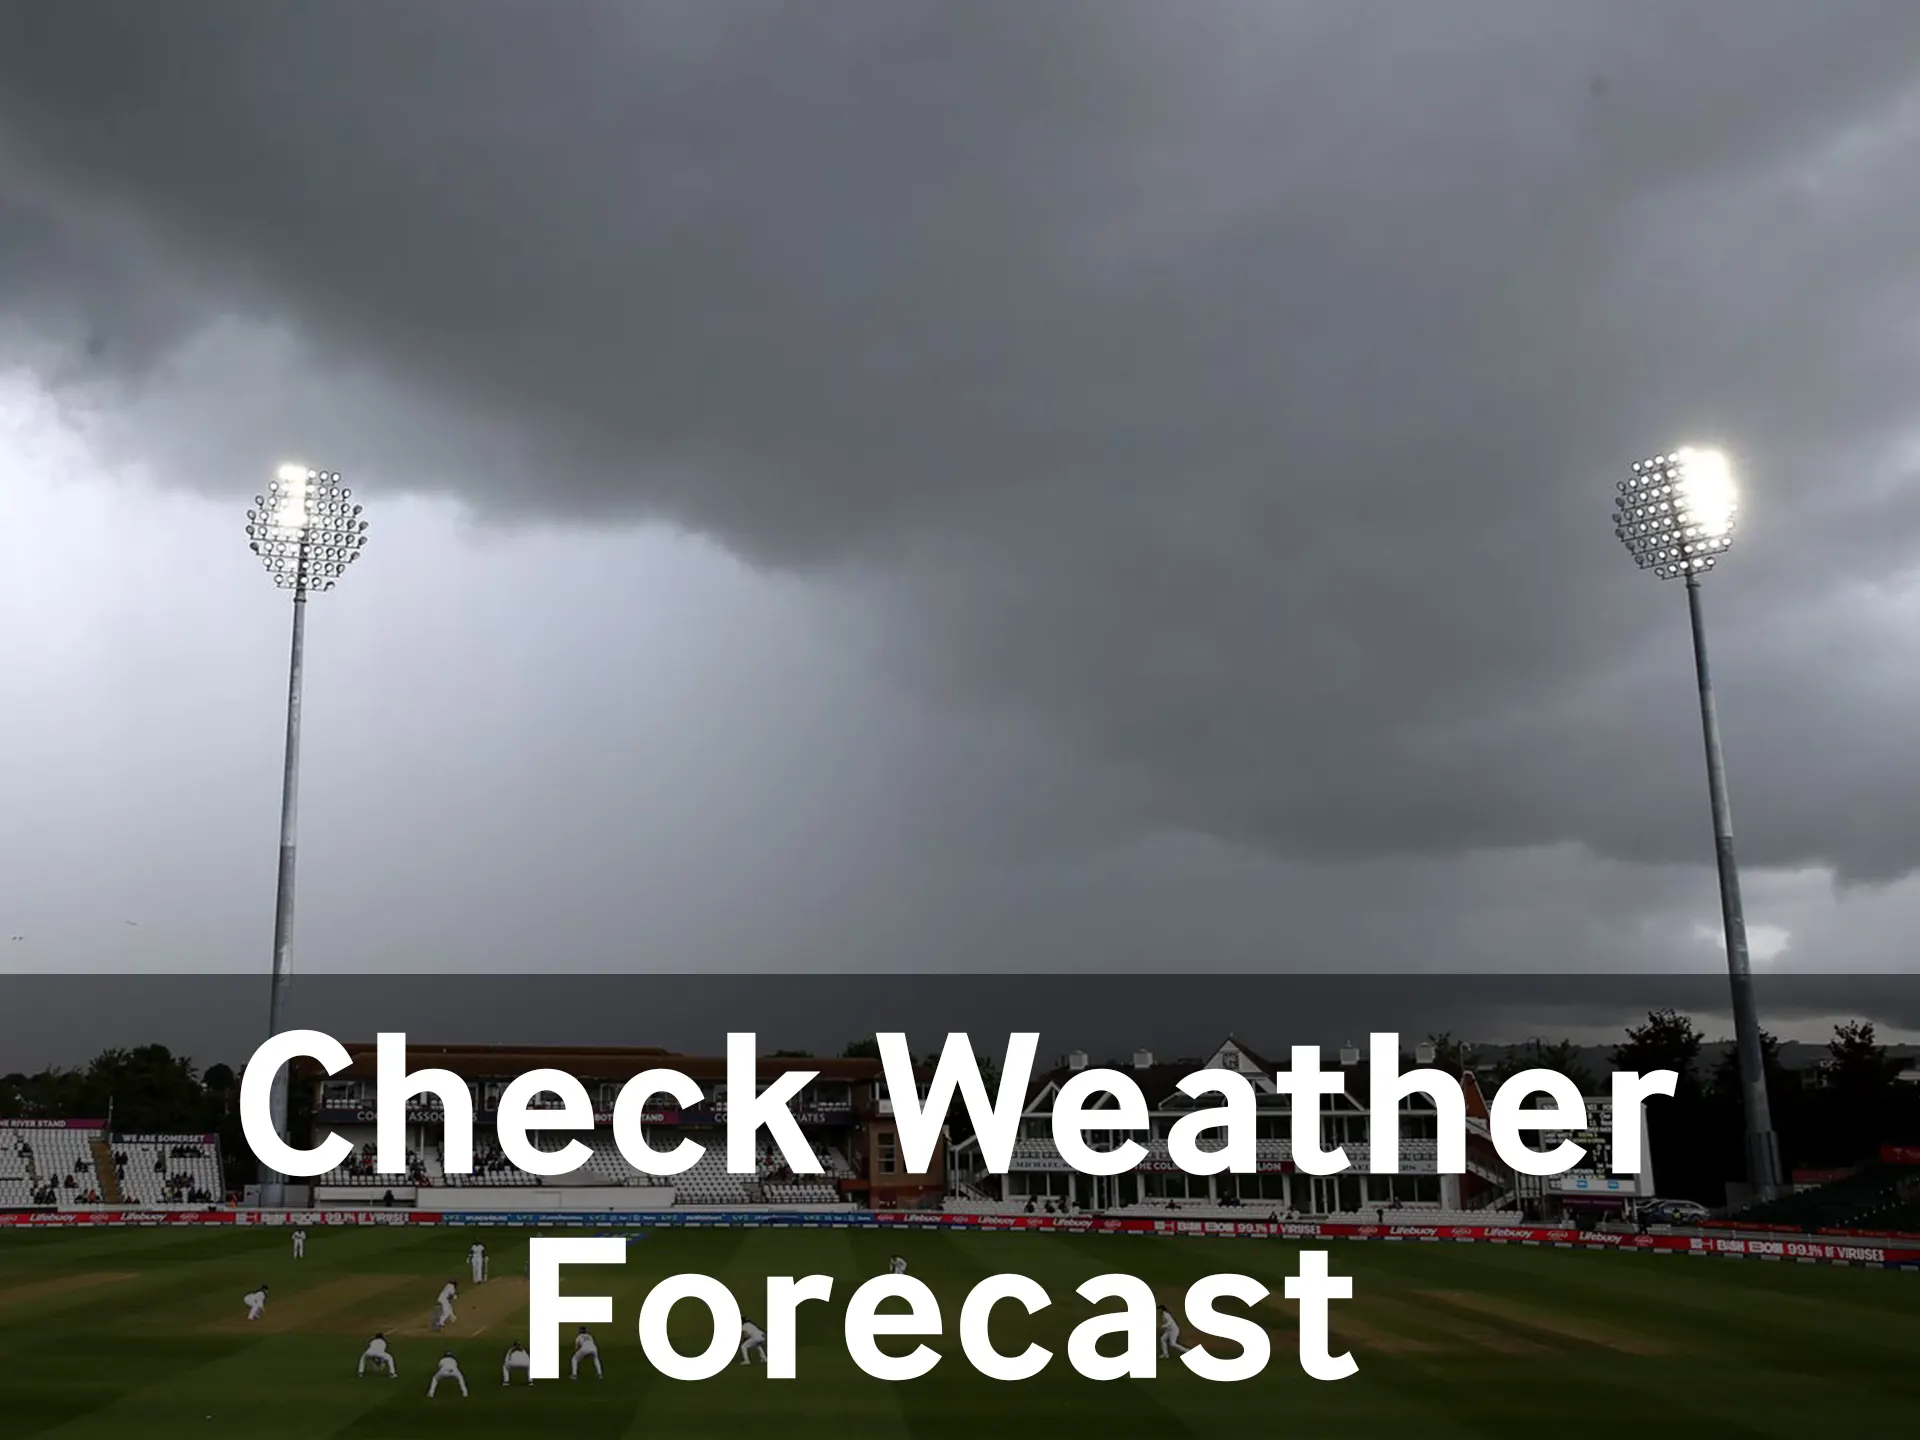 Weather is huge factor in interruption of cricket matches.